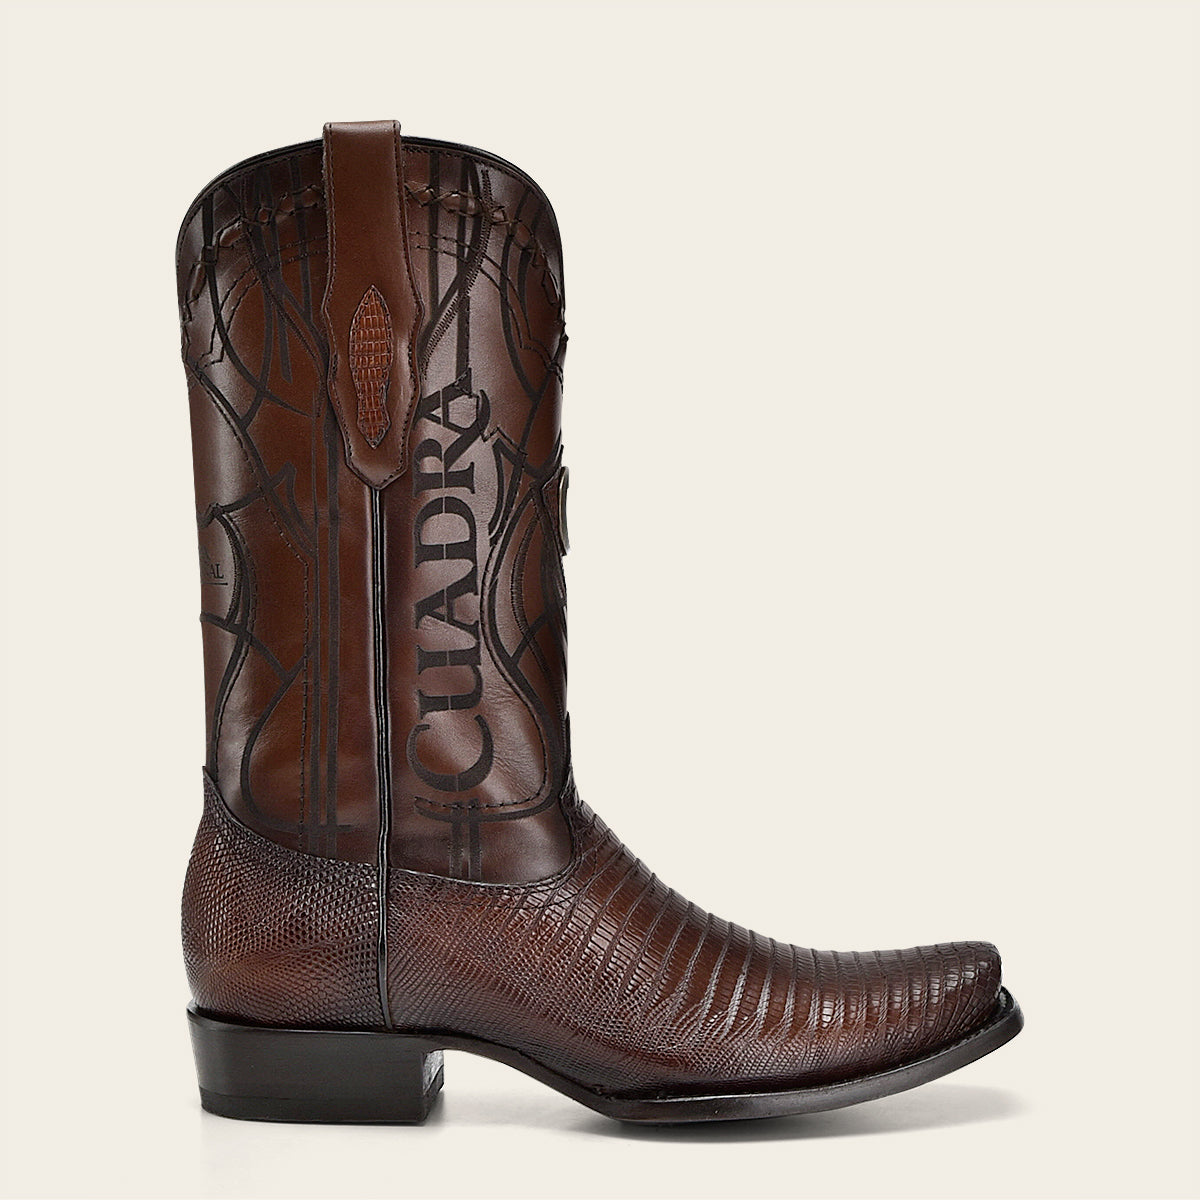 Engraved honey exotic lizard leather boot